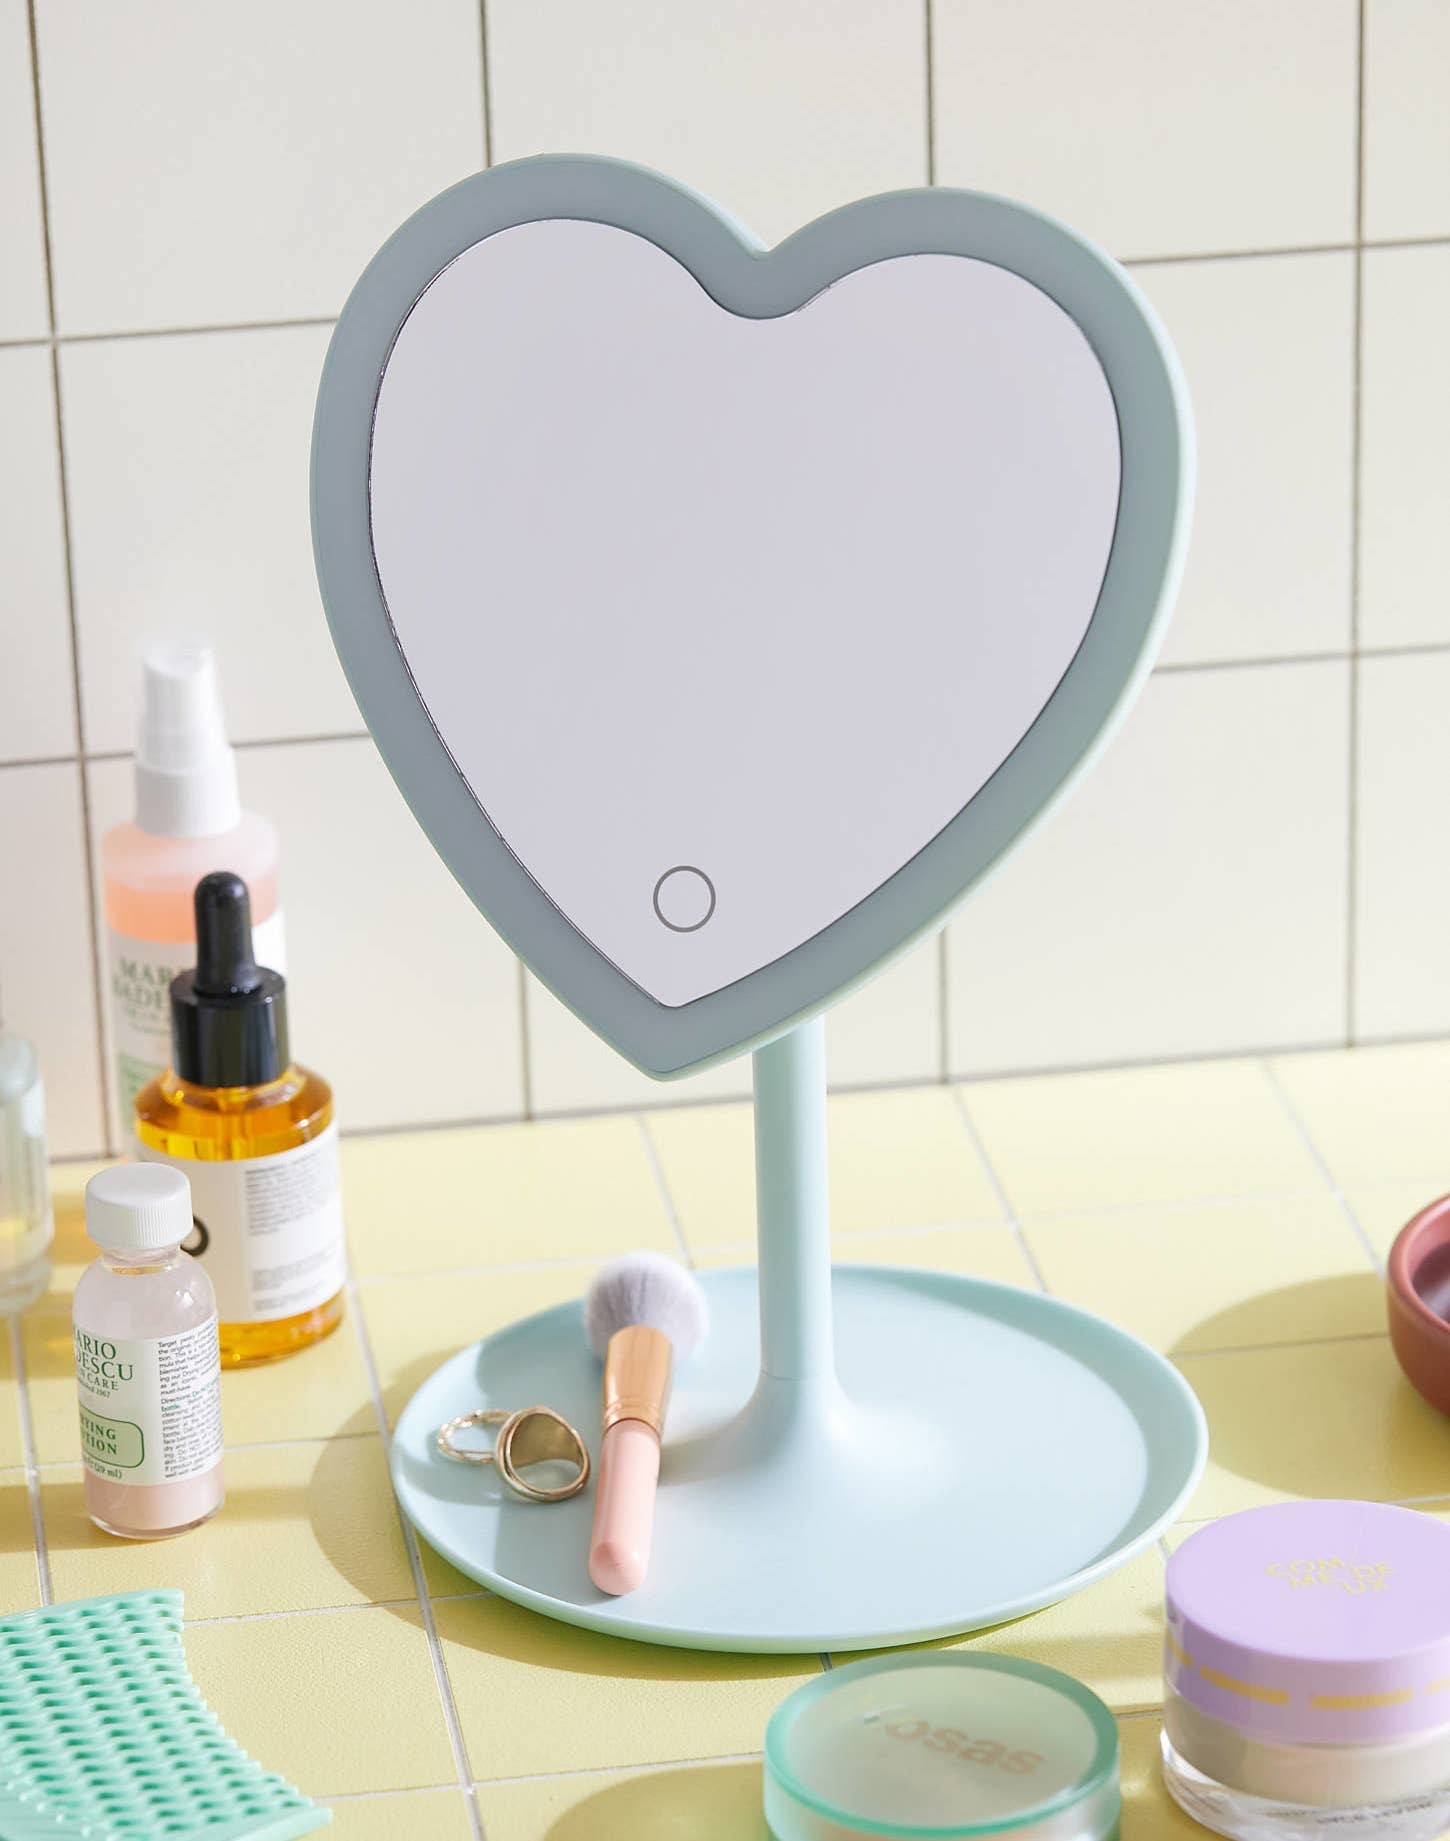 a heart-shaped led light mirror with a tray for baubles